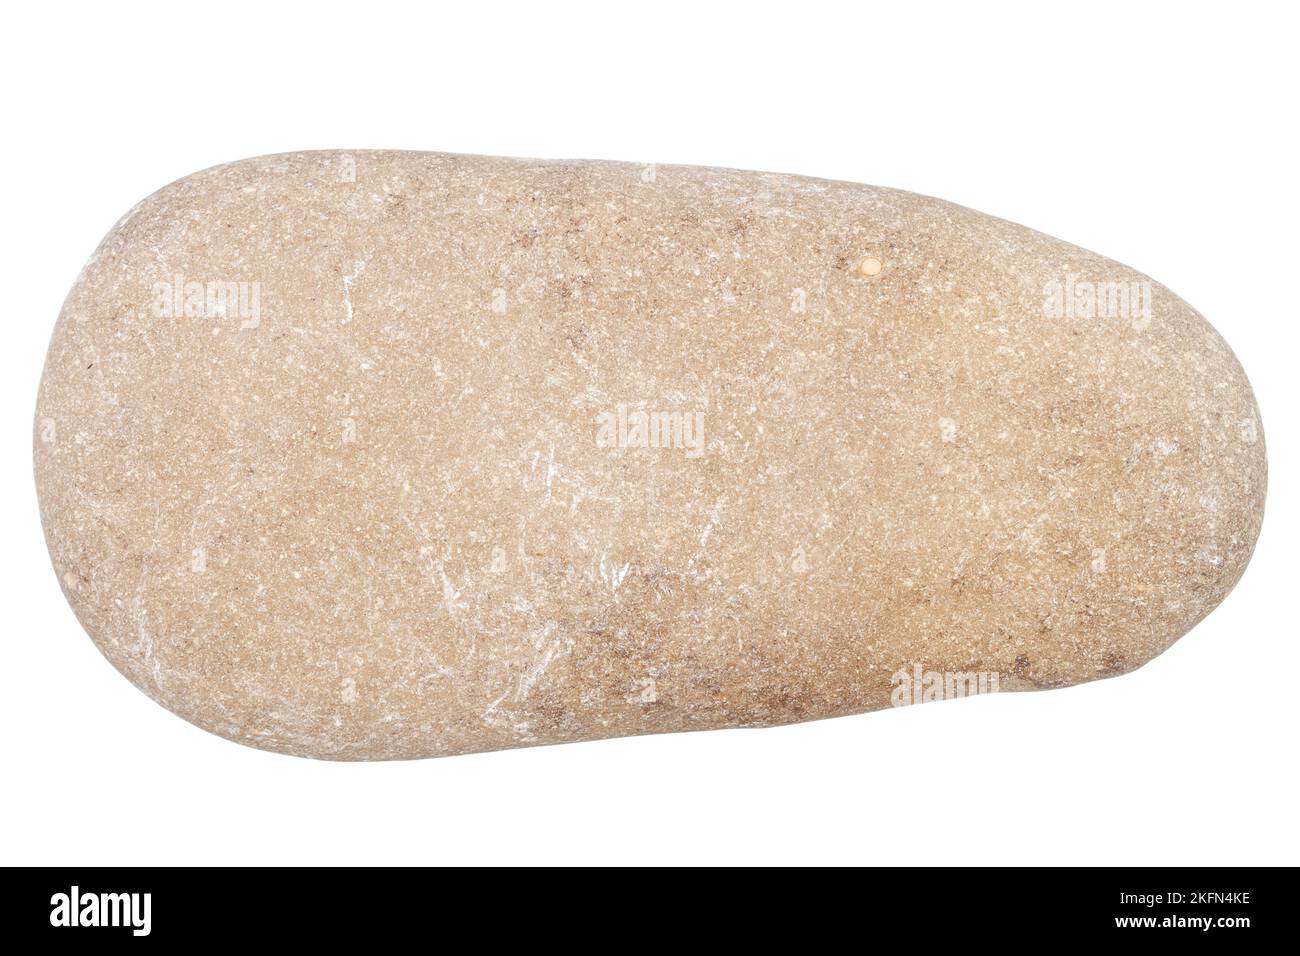 Top view of single beige pebble isolated on white background. Stock Photo